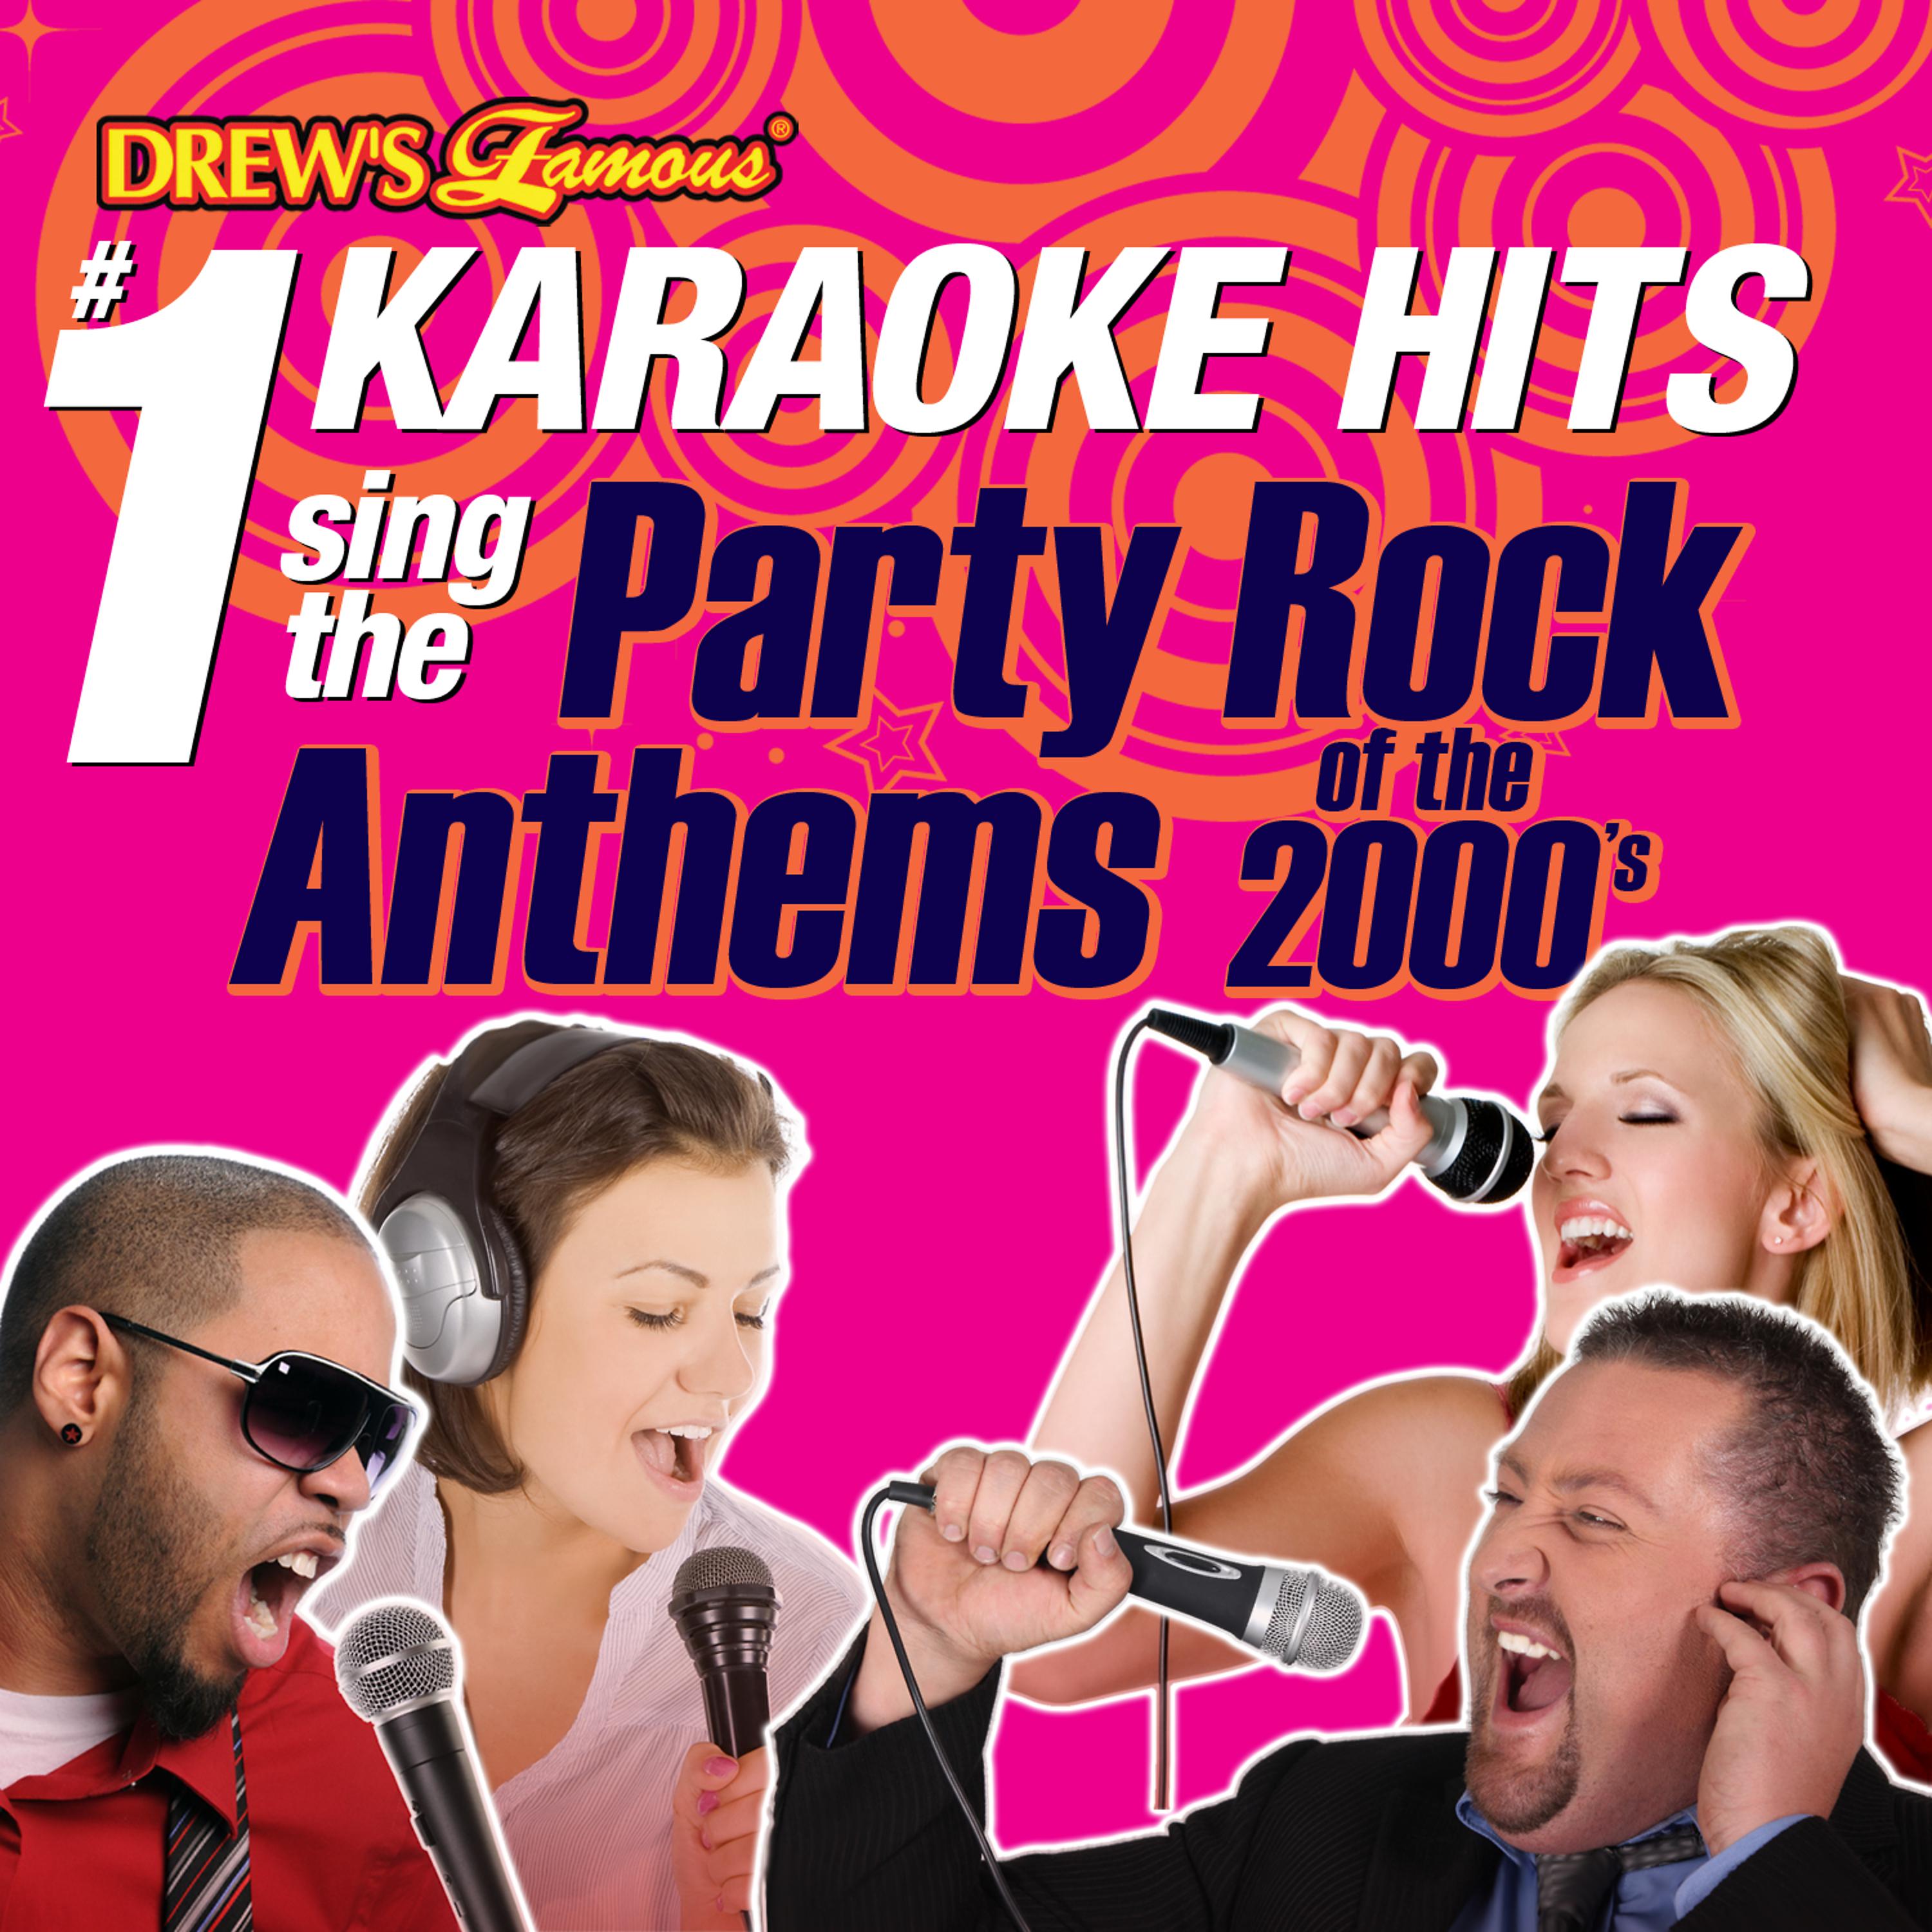 Постер альбома Drew's Famous #1 Karaoke Hits: Sing the Party Rock Anthems of the 2000's